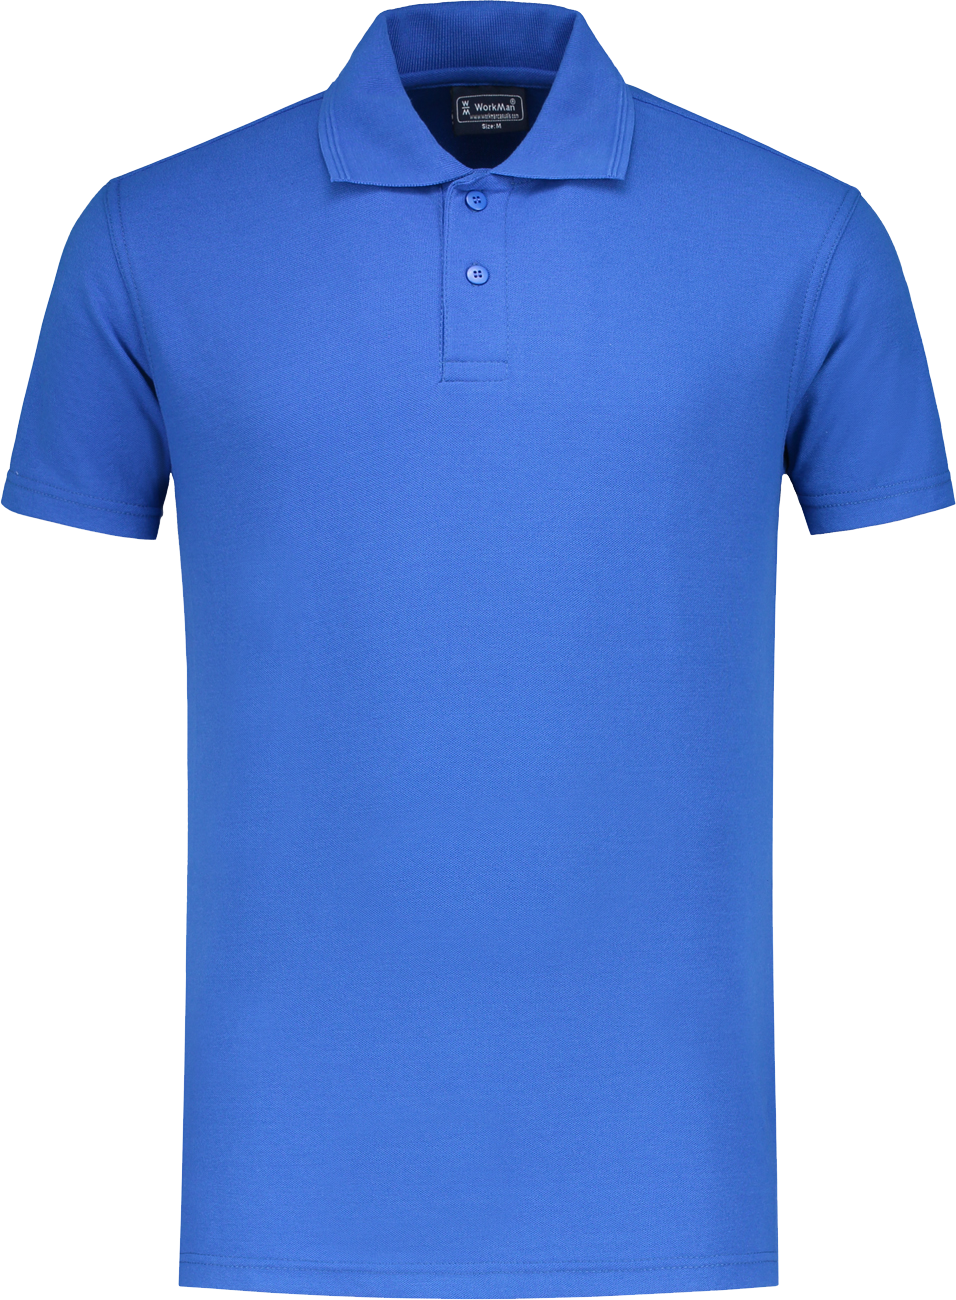 10.6.8104.01 8104 Poloshirt Outfitters Royal Blue S